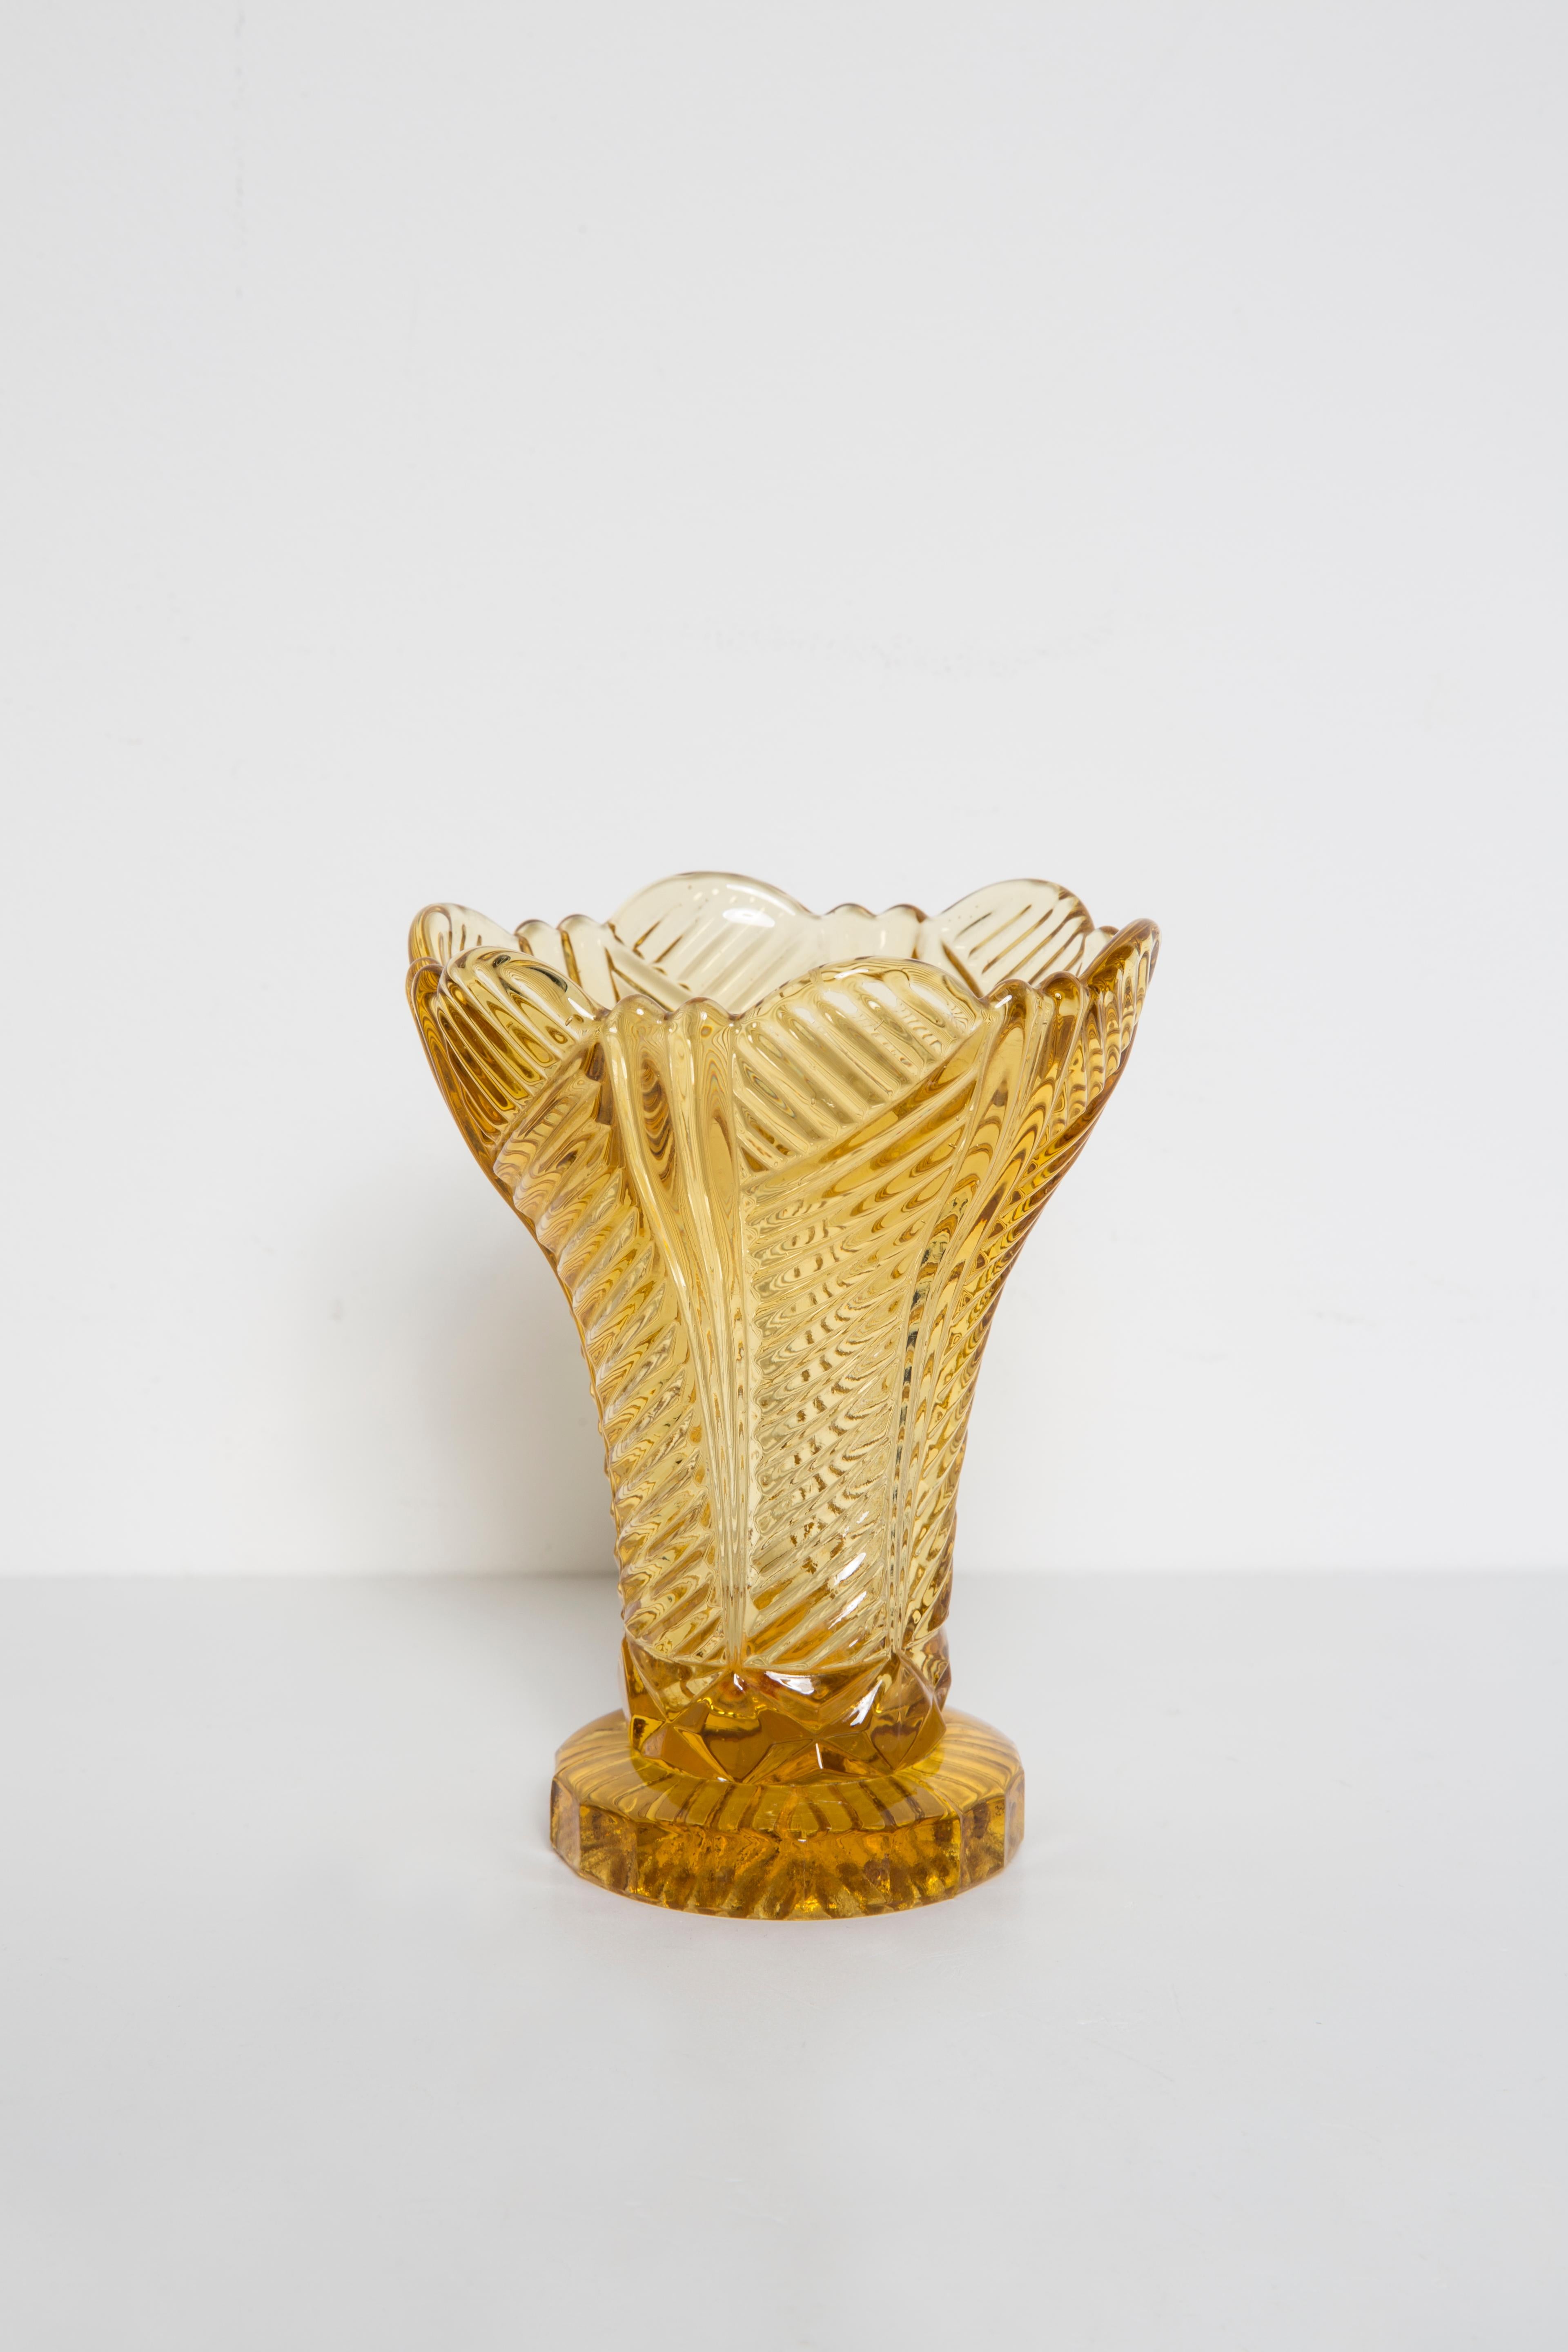 Produced in 1960s.

Pressed glass in perfect condition.
The vase looks like it has just been taken out of the box.
The picture reflects the color in which it presents live.

No jags, defects etc. 
The irregular surface of the object reflects and